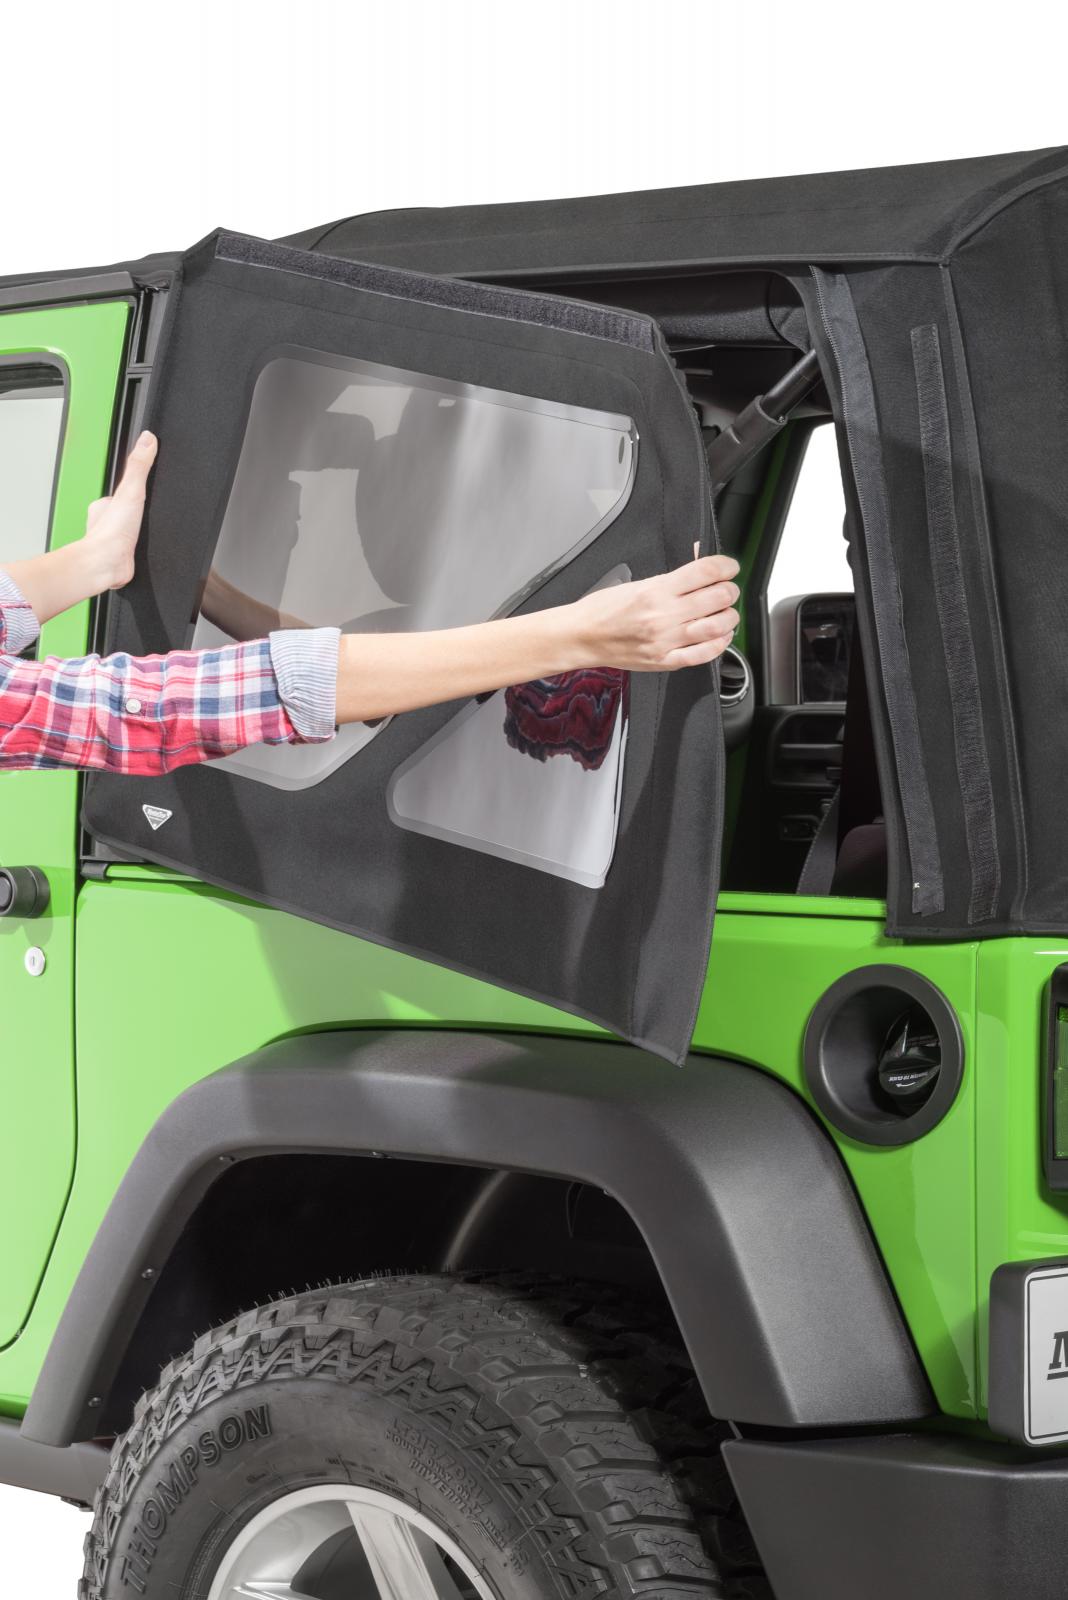 MasterTwill® Soft Tops for Jeep® Wrangler